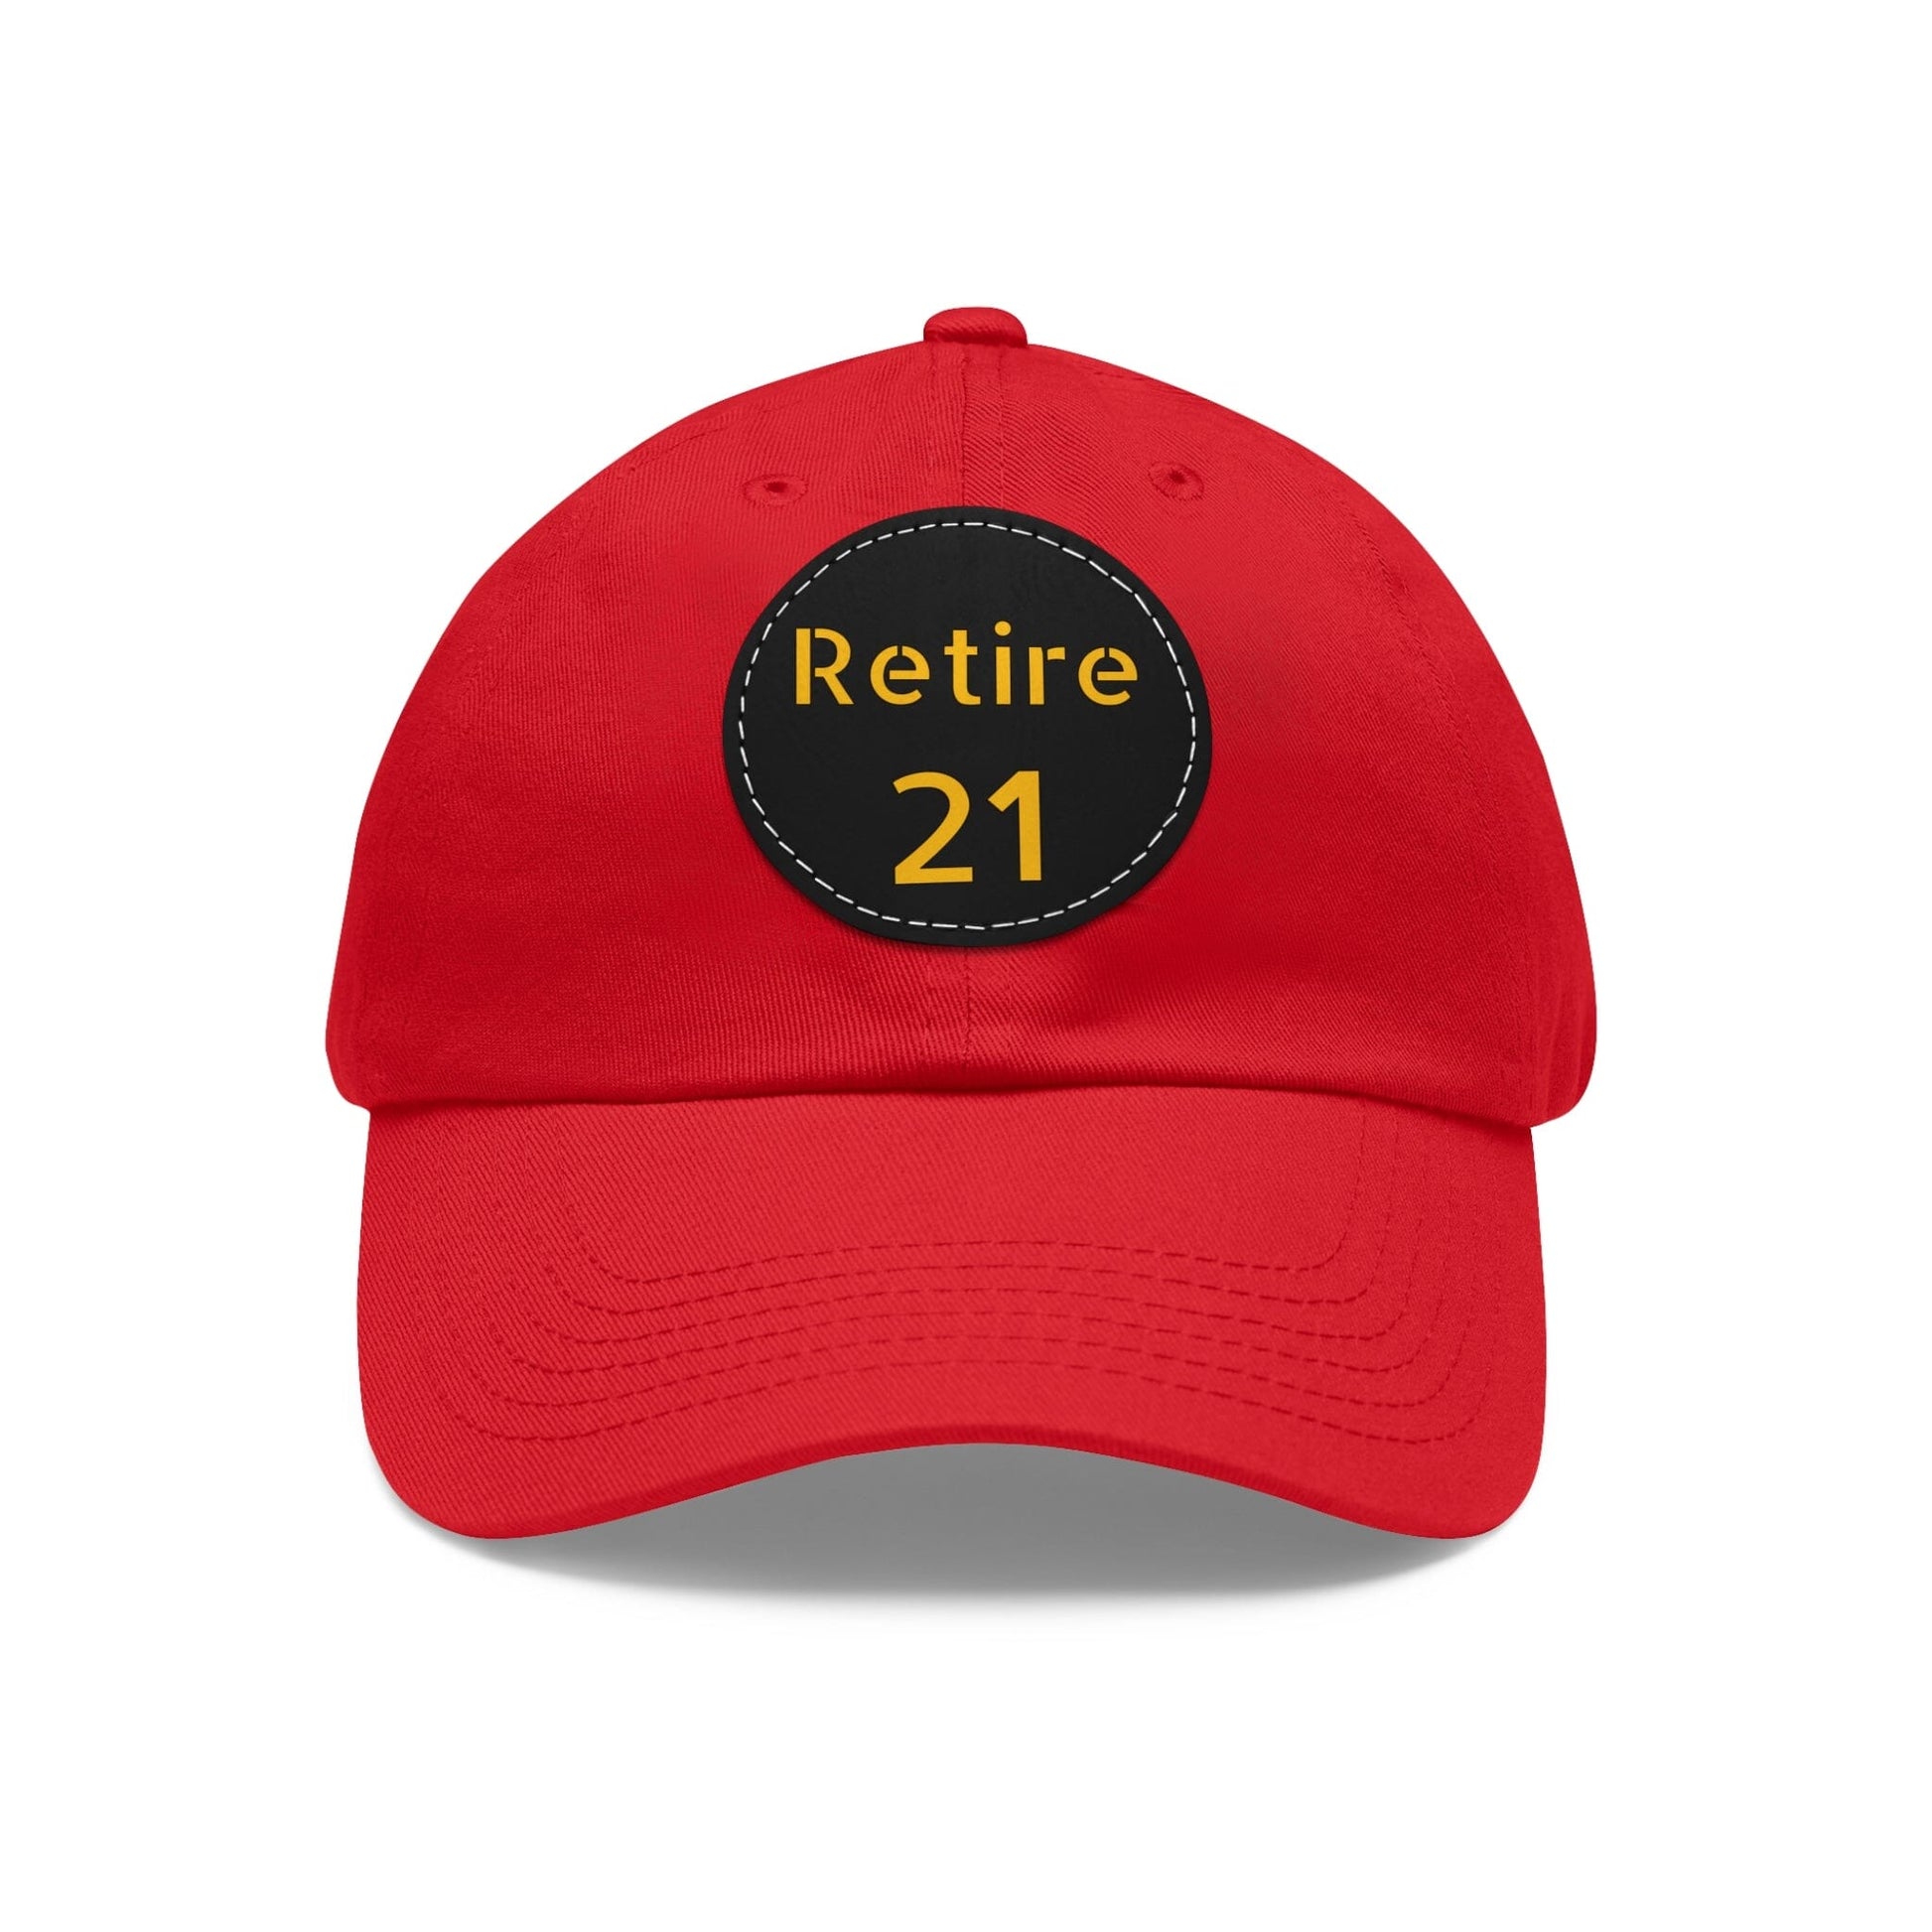 Retire 21 Hat With Leather Patch Hats Yinzergear Red / Black patch Circle One size